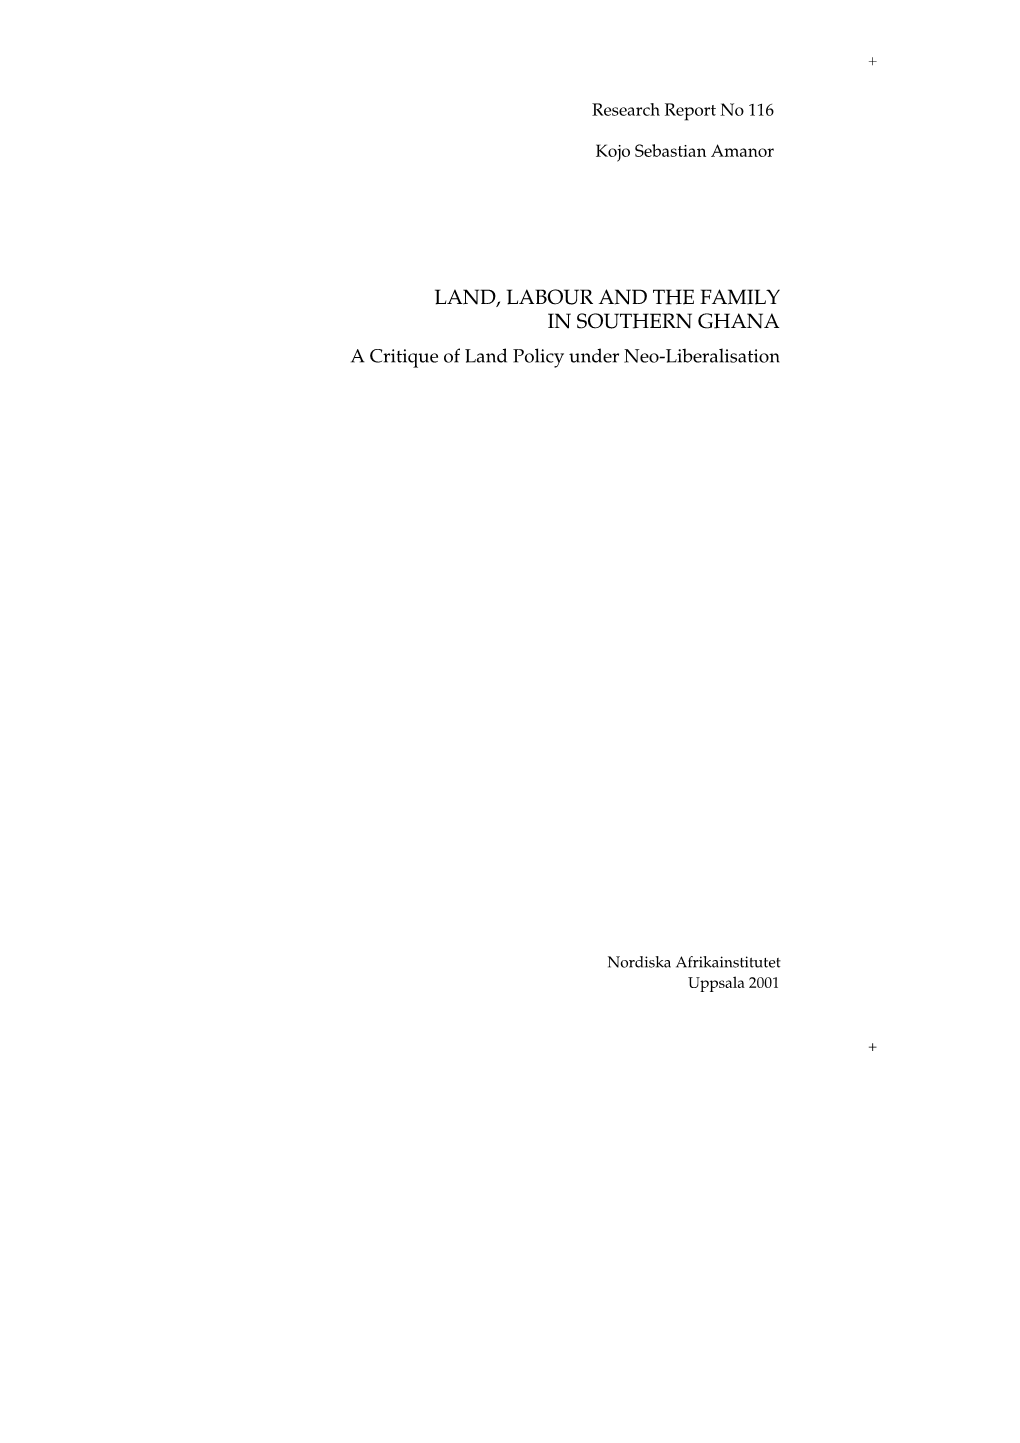 LAND, LABOUR and the FAMILY in SOUTHERN GHANA a Critique of Land Policy Under Neo-Liberalisation